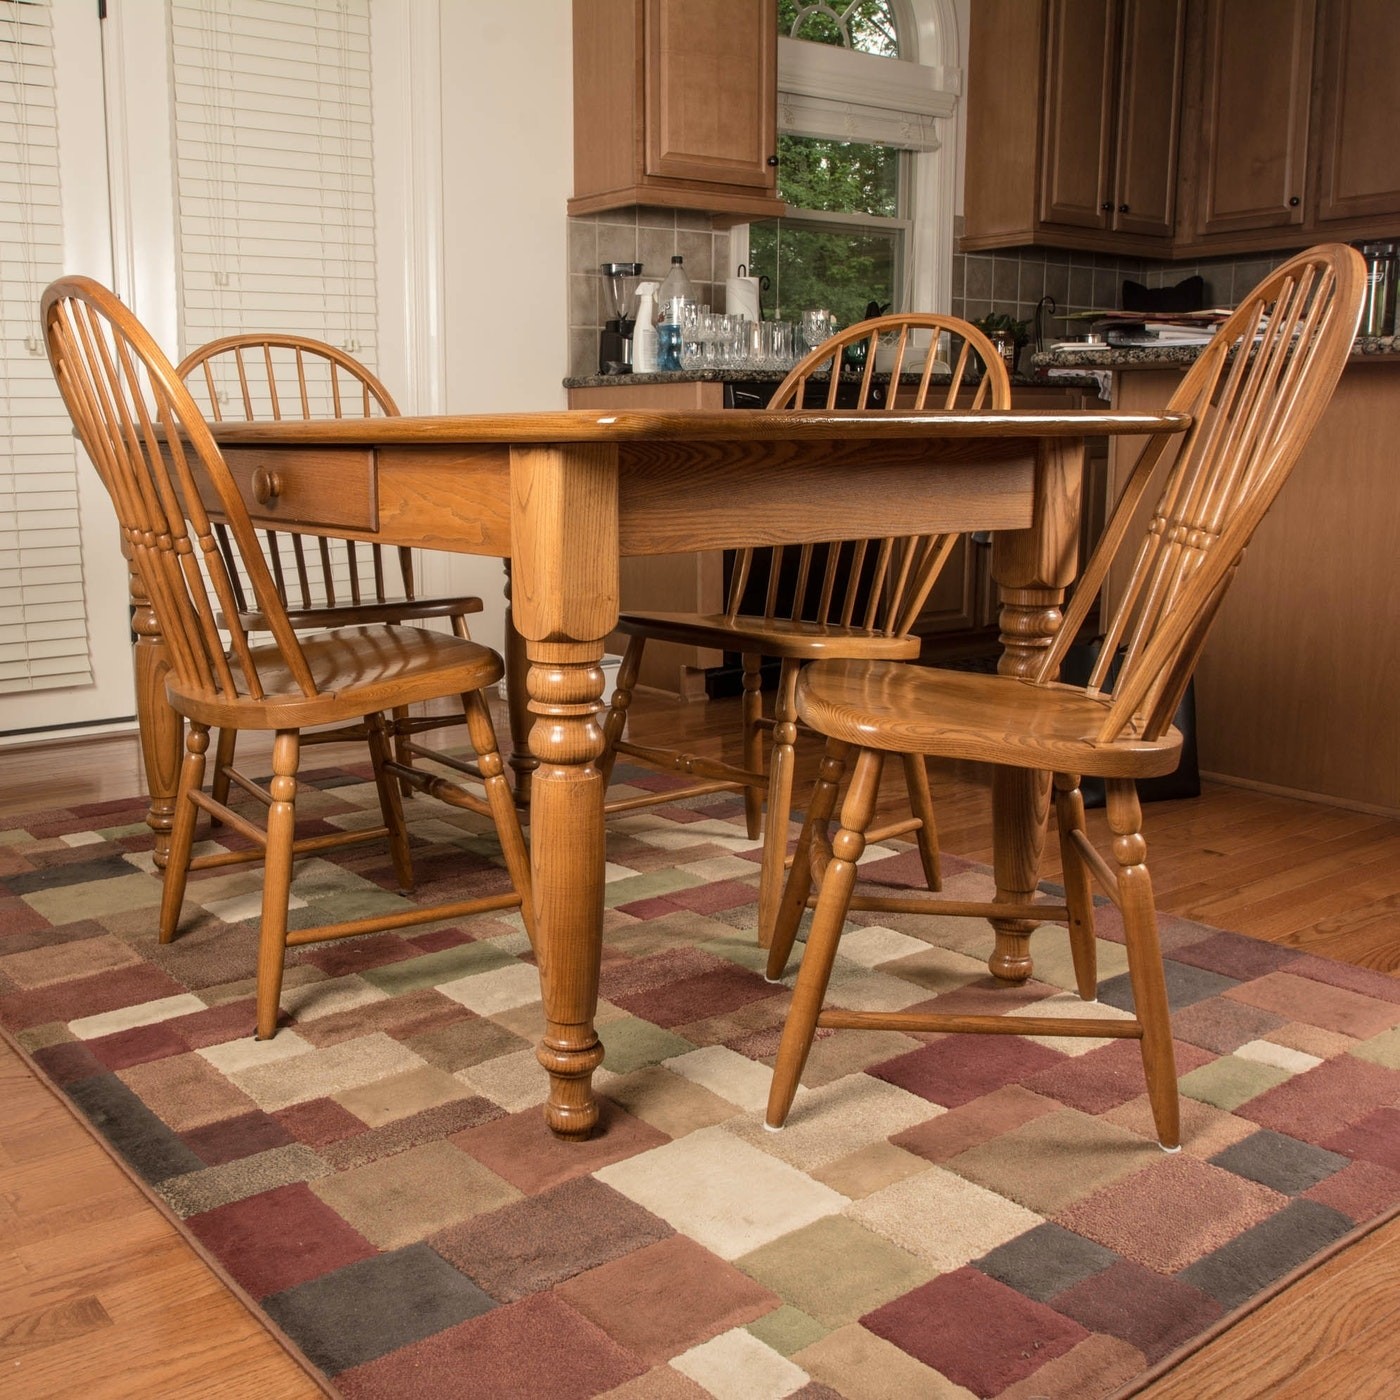 S bent bros oak farmhouse style dining room table and